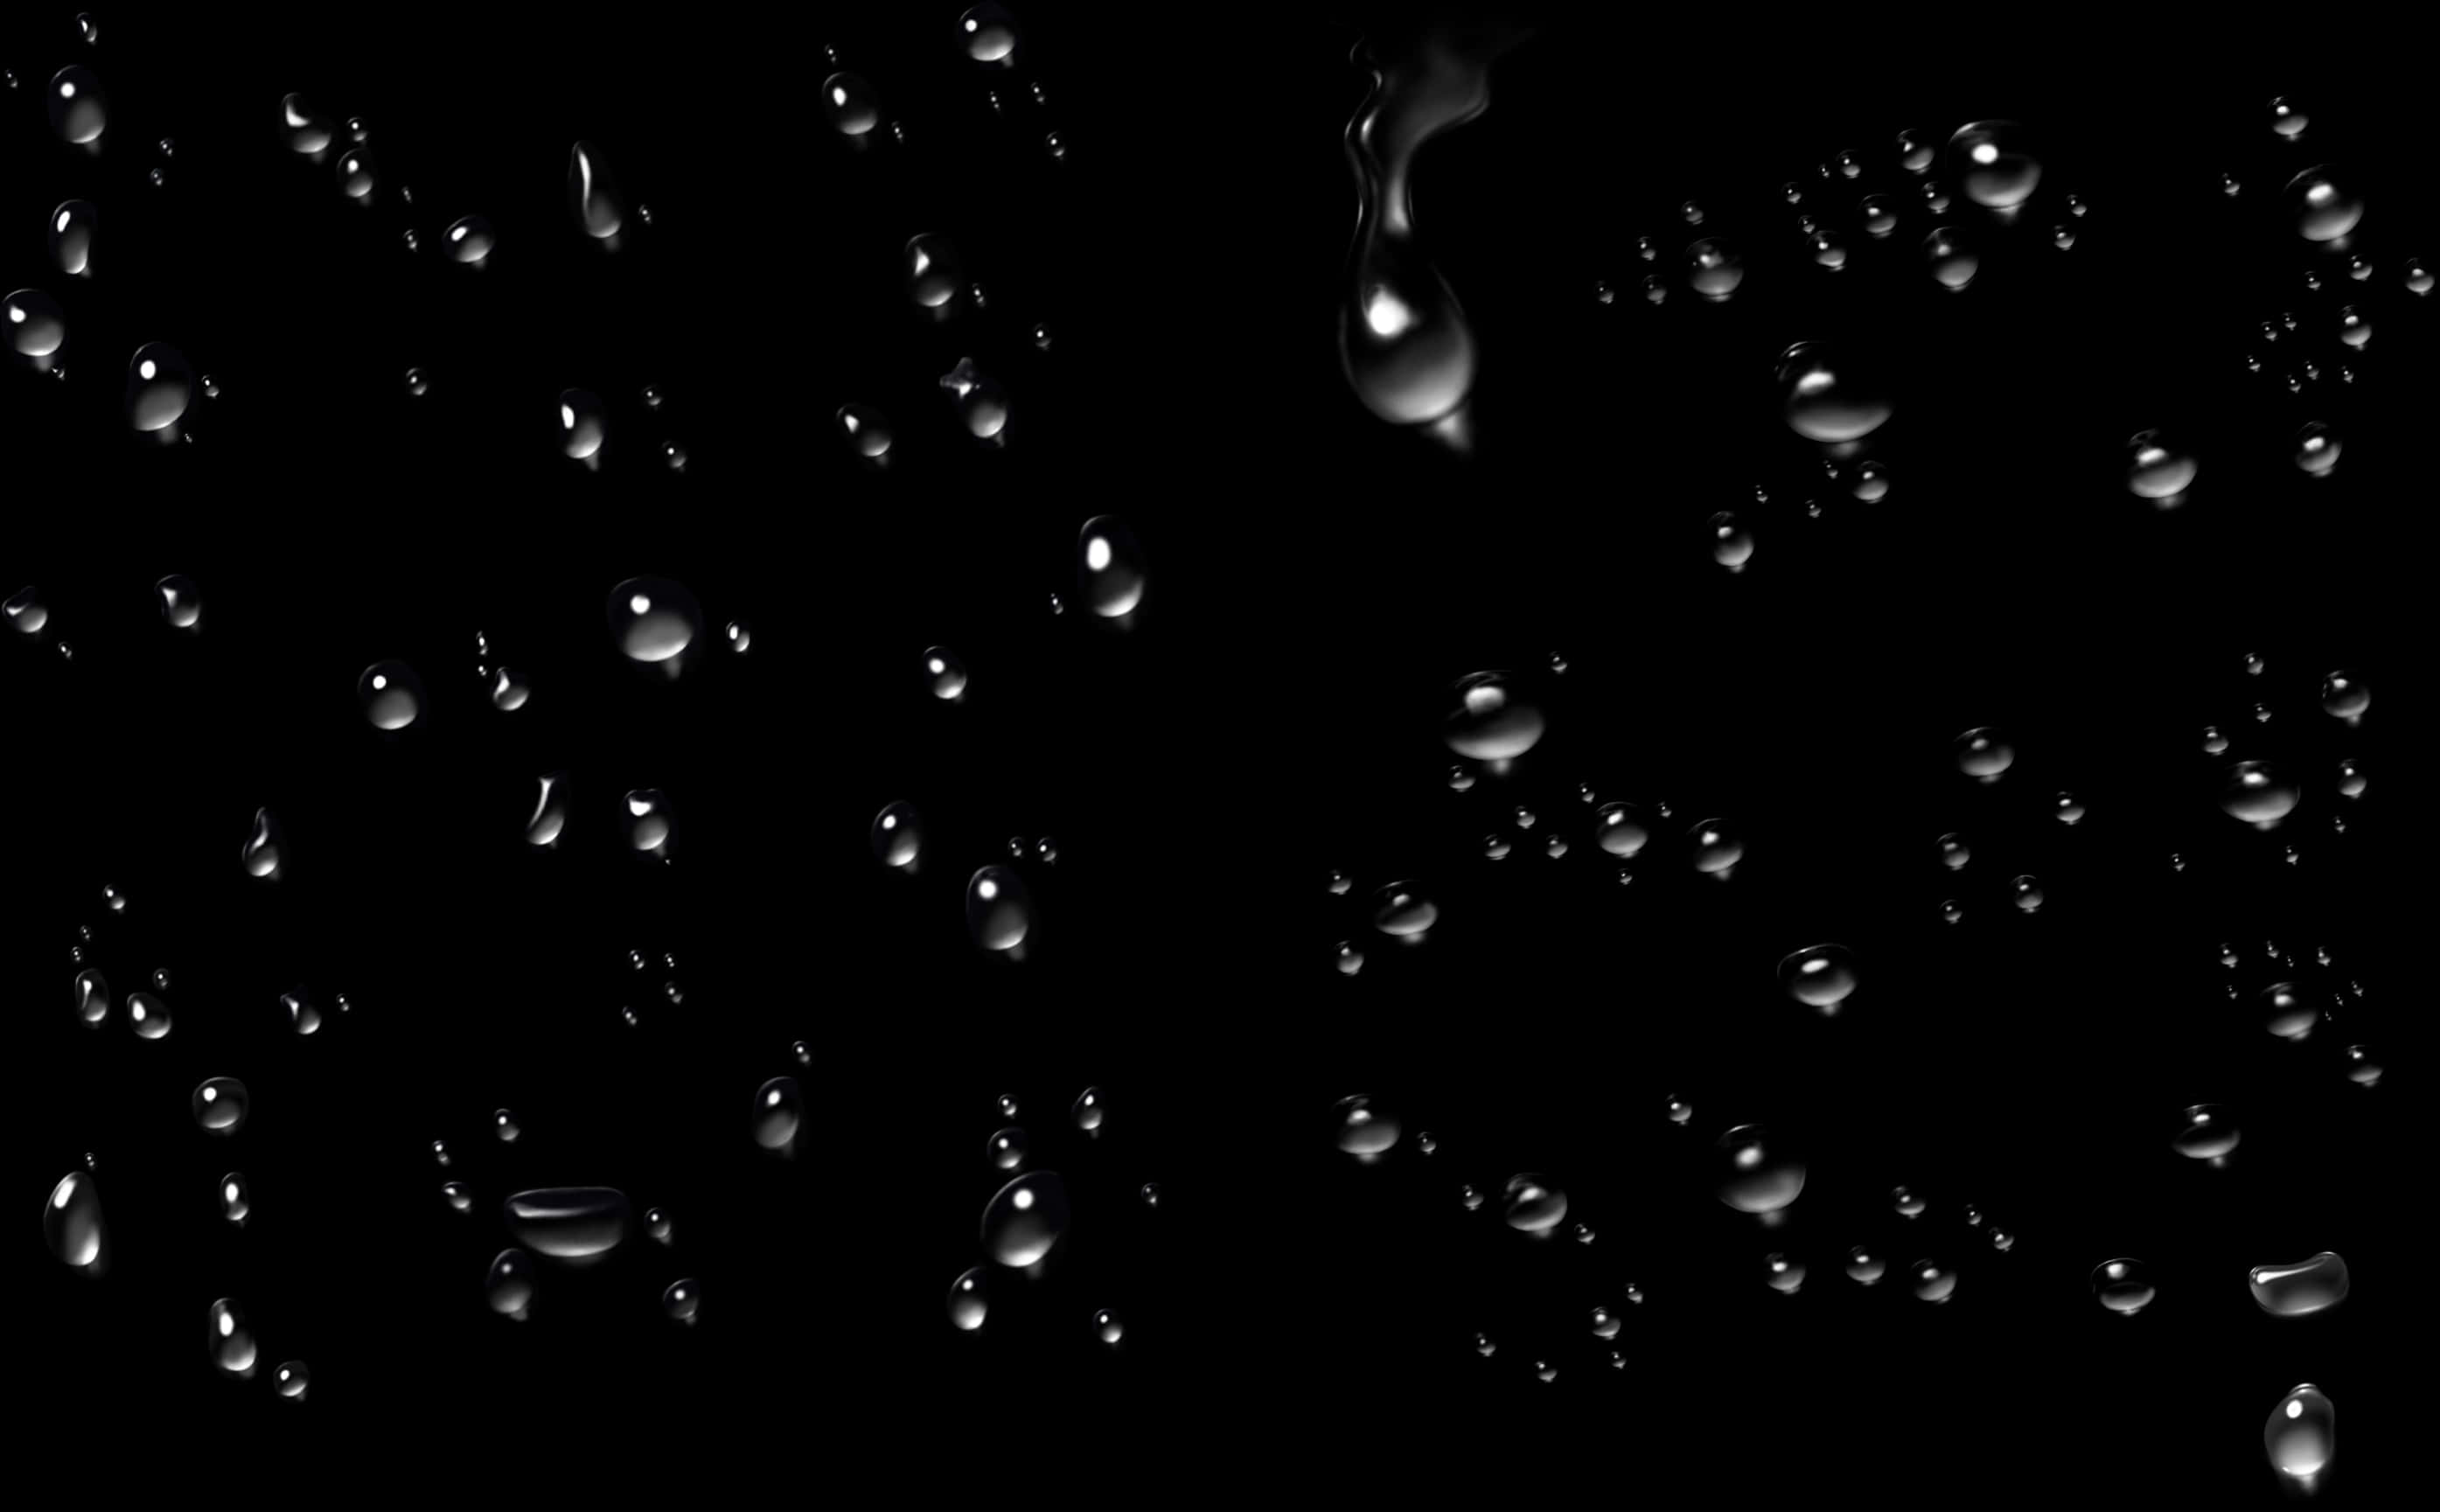 A Group Of Water Drops On A Black Background